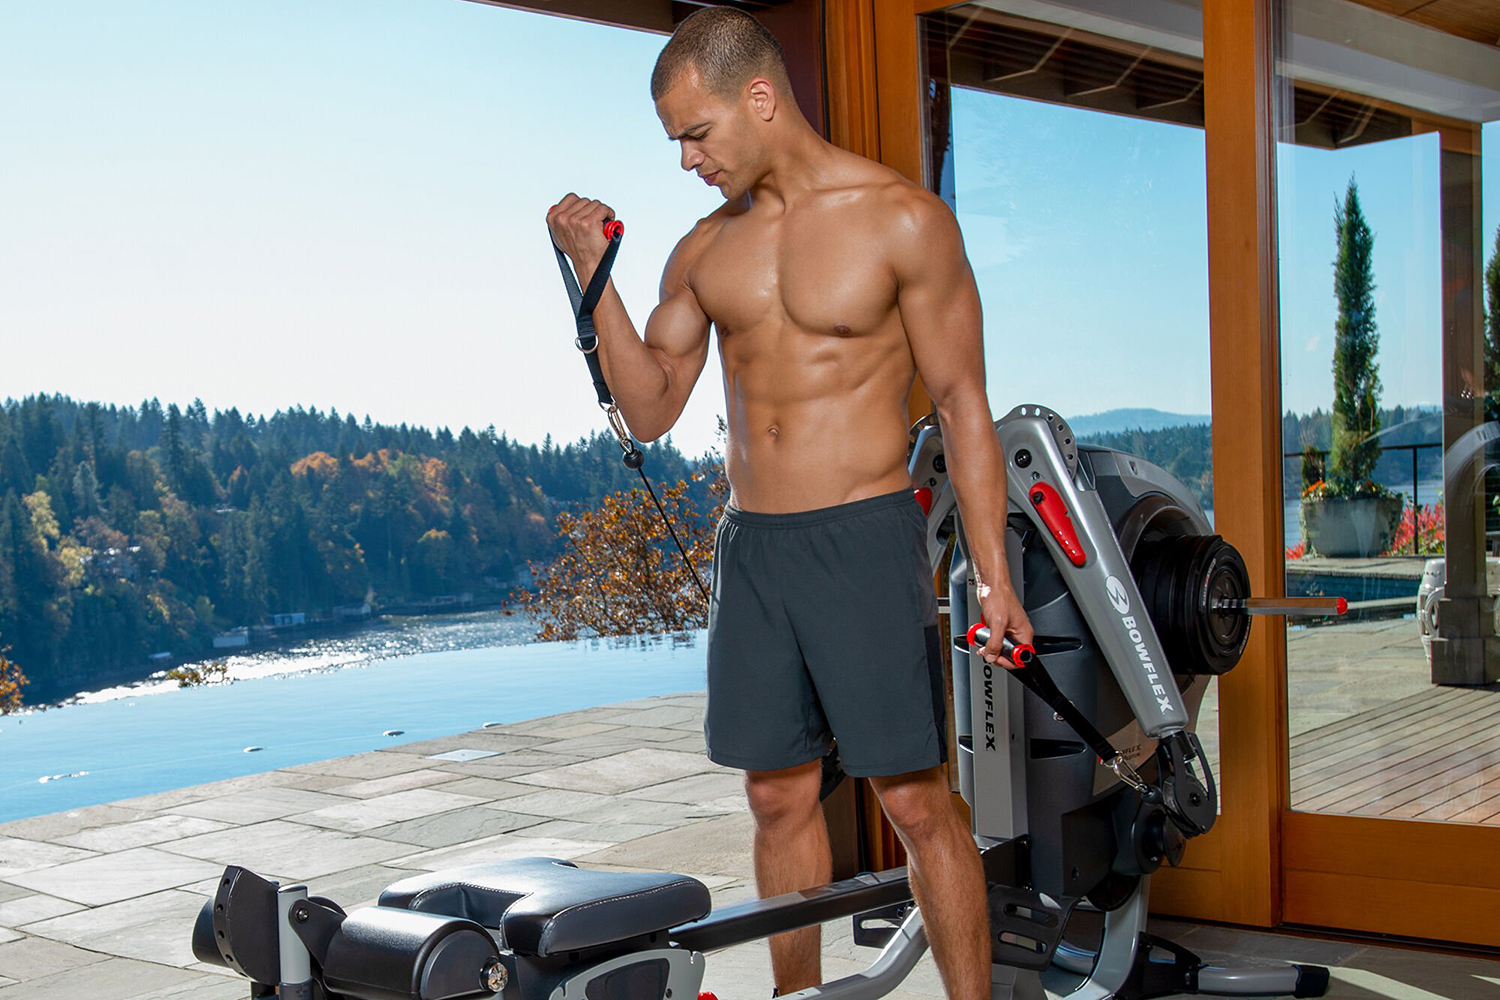 Working out at a gym is overrated: The best at-home workout